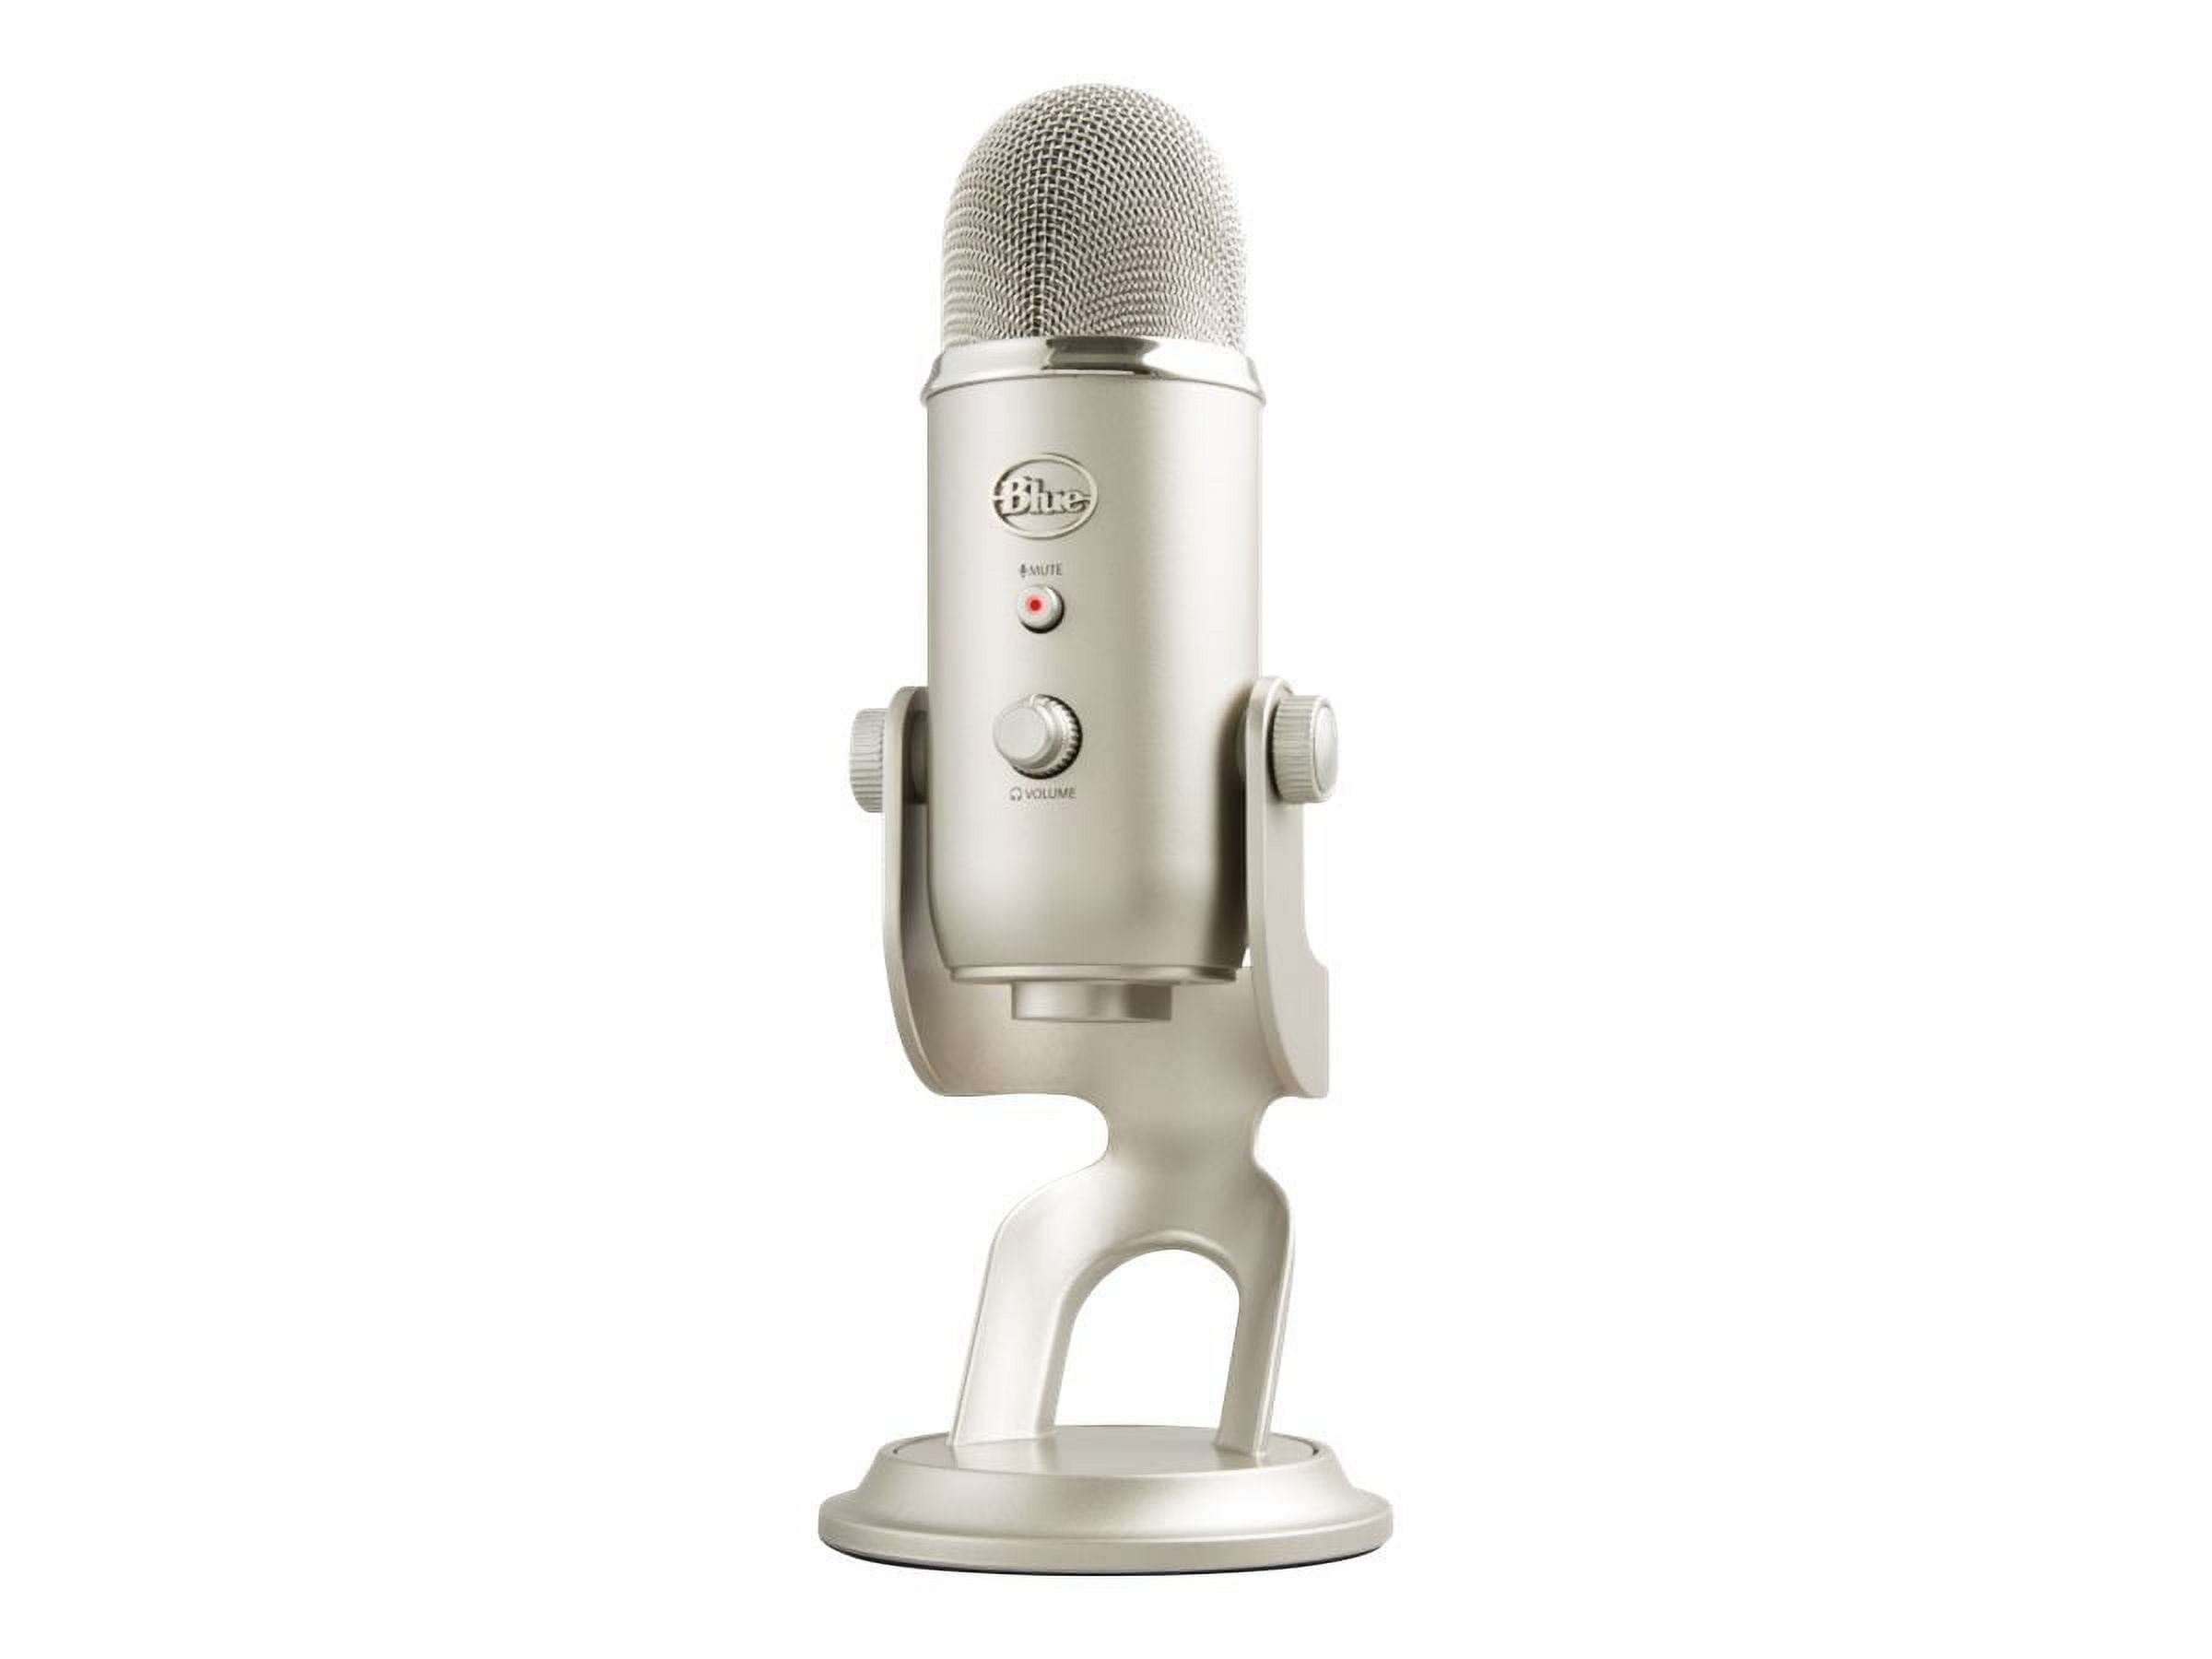 Logitech for Creators Blue Yeti USB Microphone for Gaming, Streaming,  Podcasting, Twitch, , Discord, Recording for PC and Mac, 4 Polar